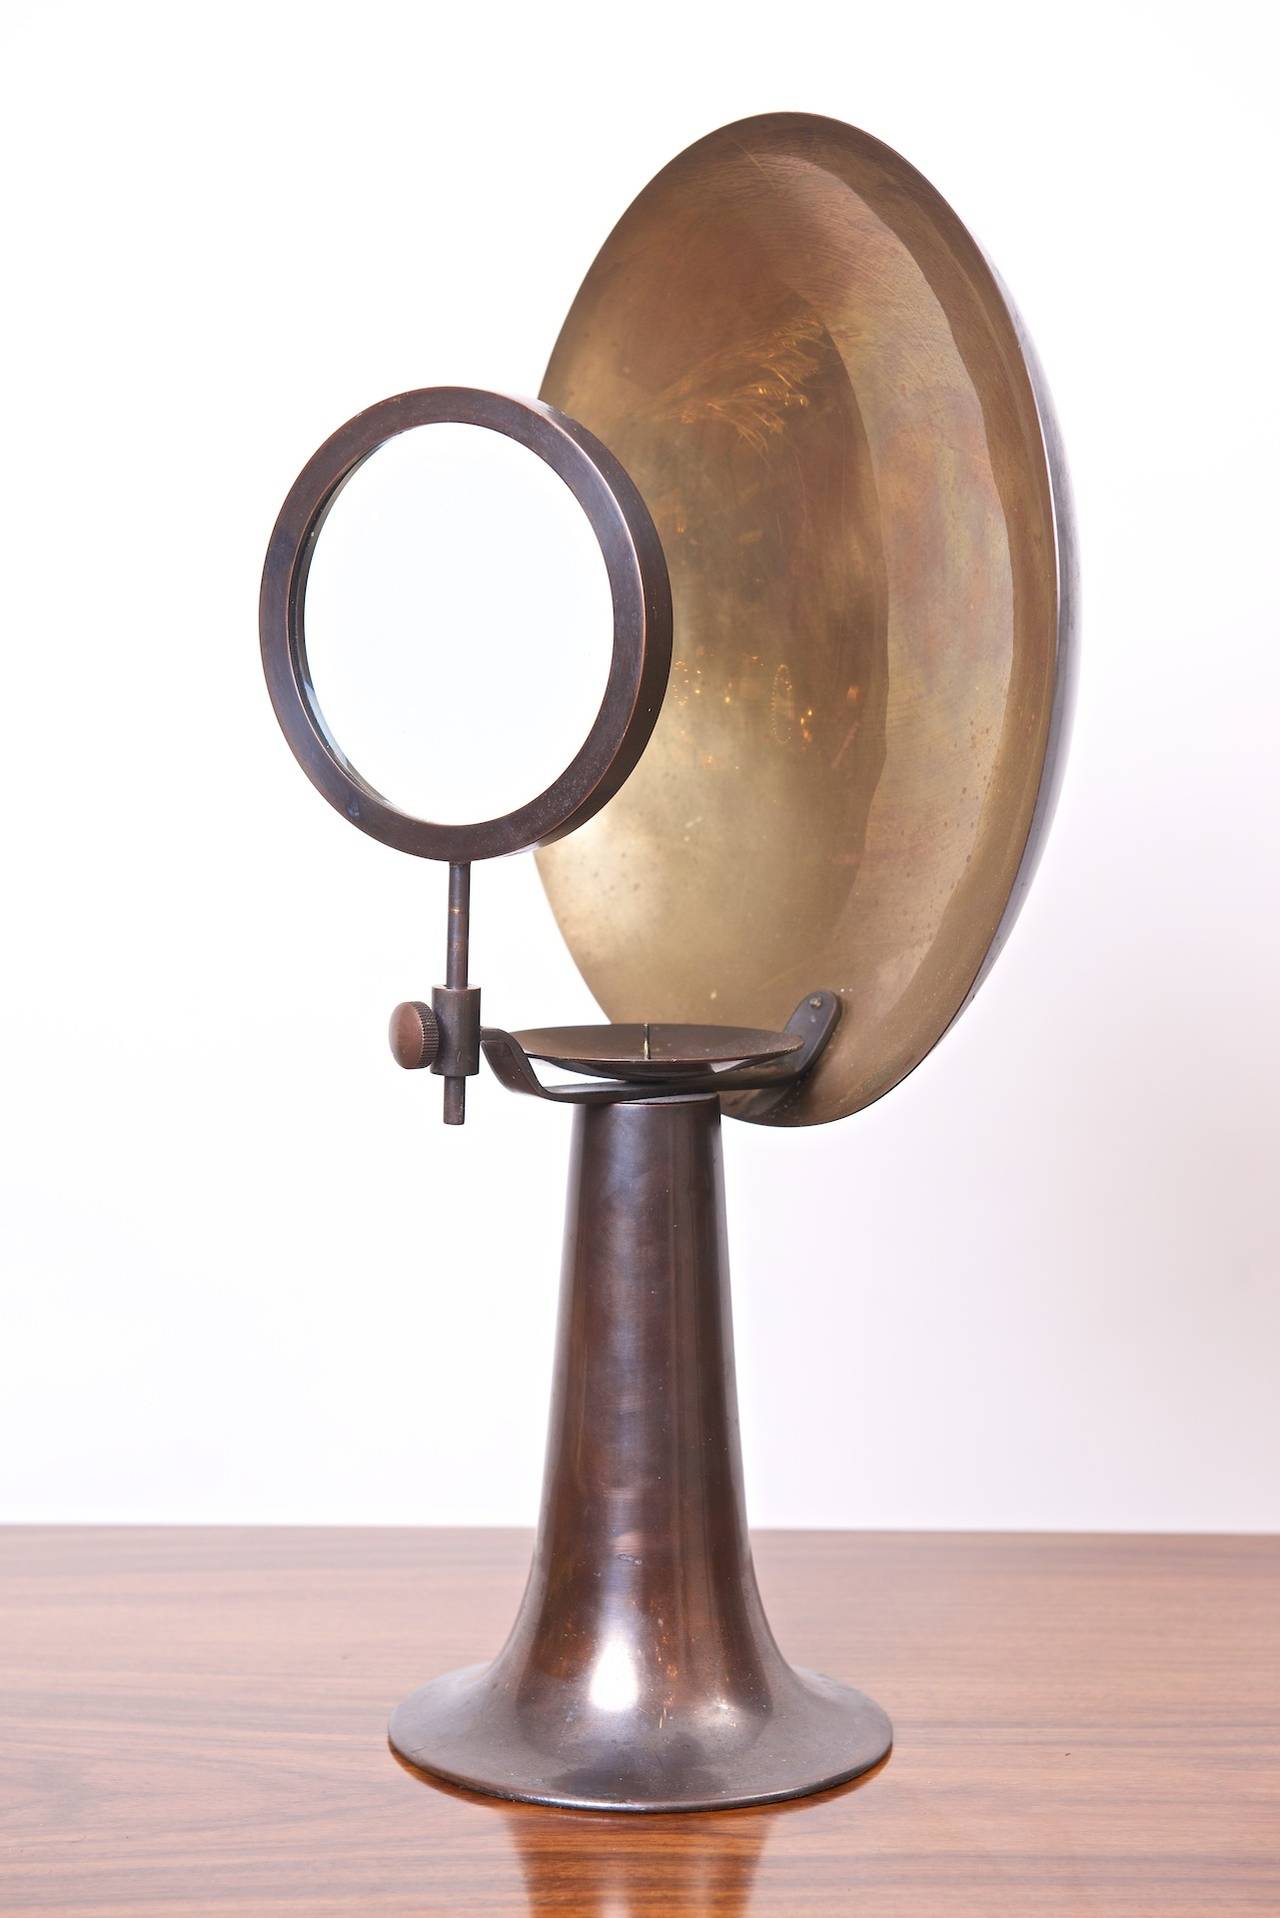 Steampunk Parabolic Reflector and Magnifying Device